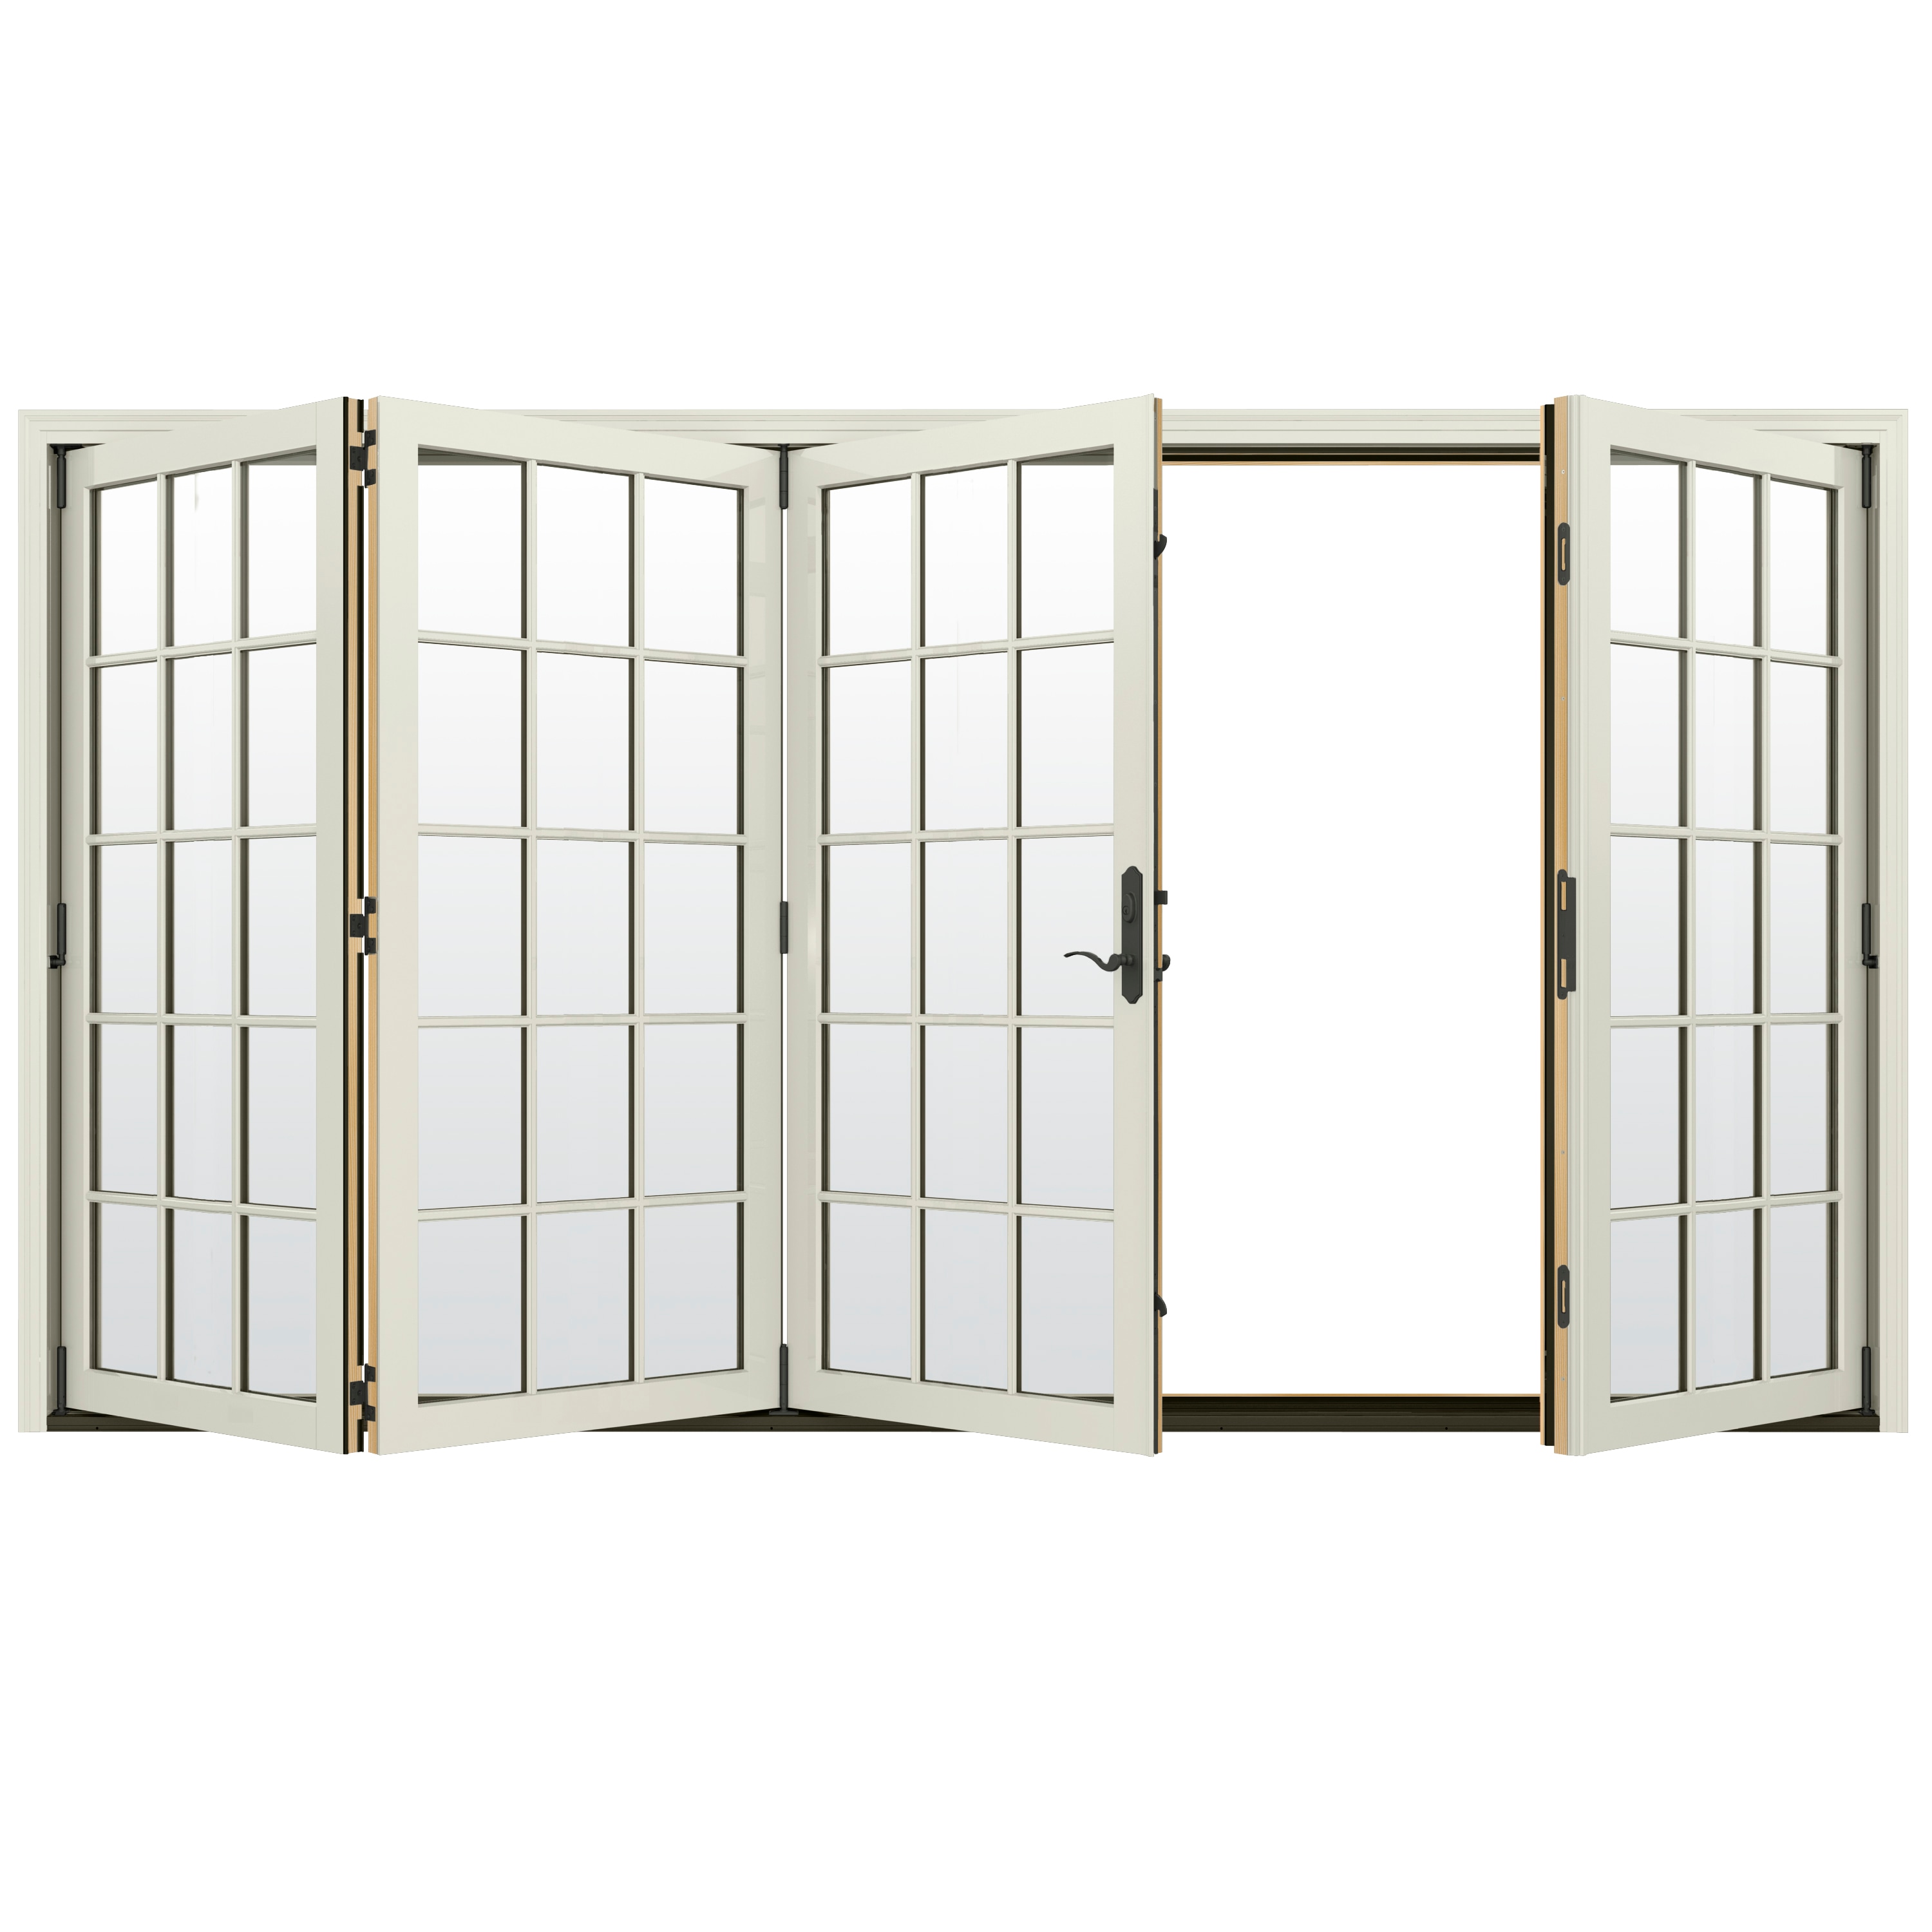 124-in x 96-in Low-e Argon Simulated Divided Light Vanilla Clad-wood Folding Left-Hand Outswing Patio Door in Off-White | - JELD-WEN LOWOLJW247800139